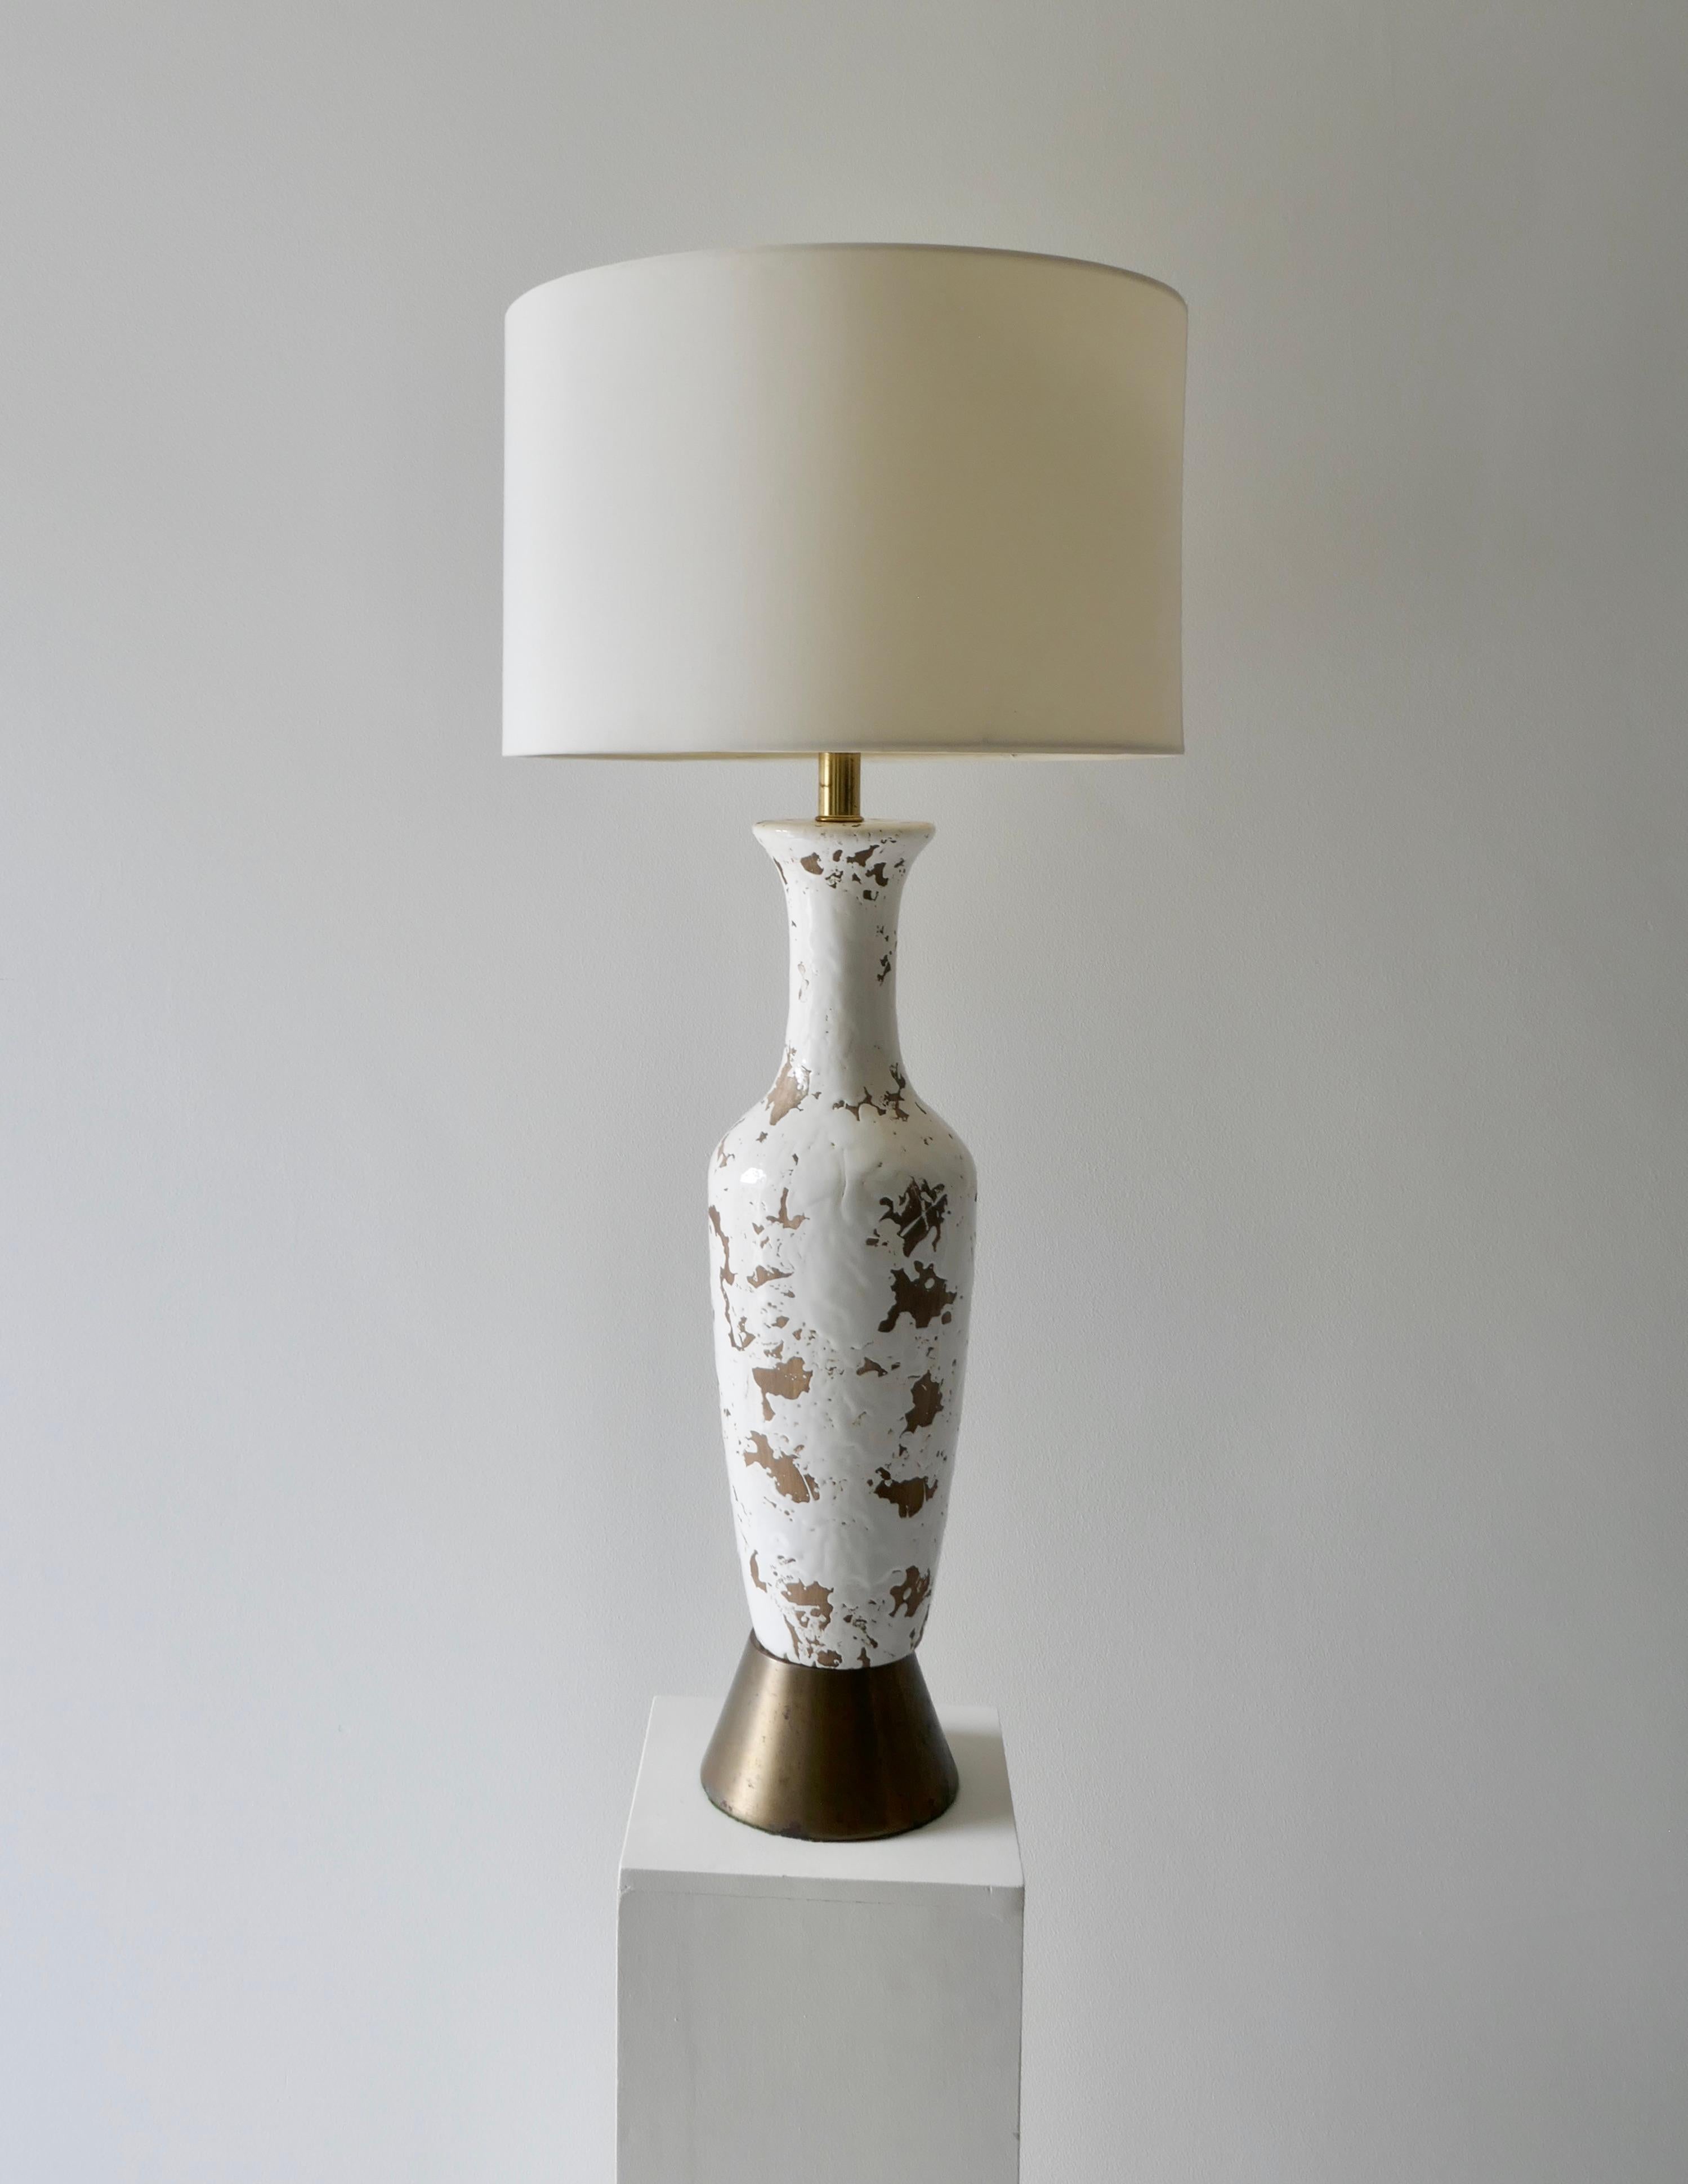 Distressed white tall mid century American ceramic table lamp with brass base
Perfect in a living room or bedroom 
New lampshade.

 